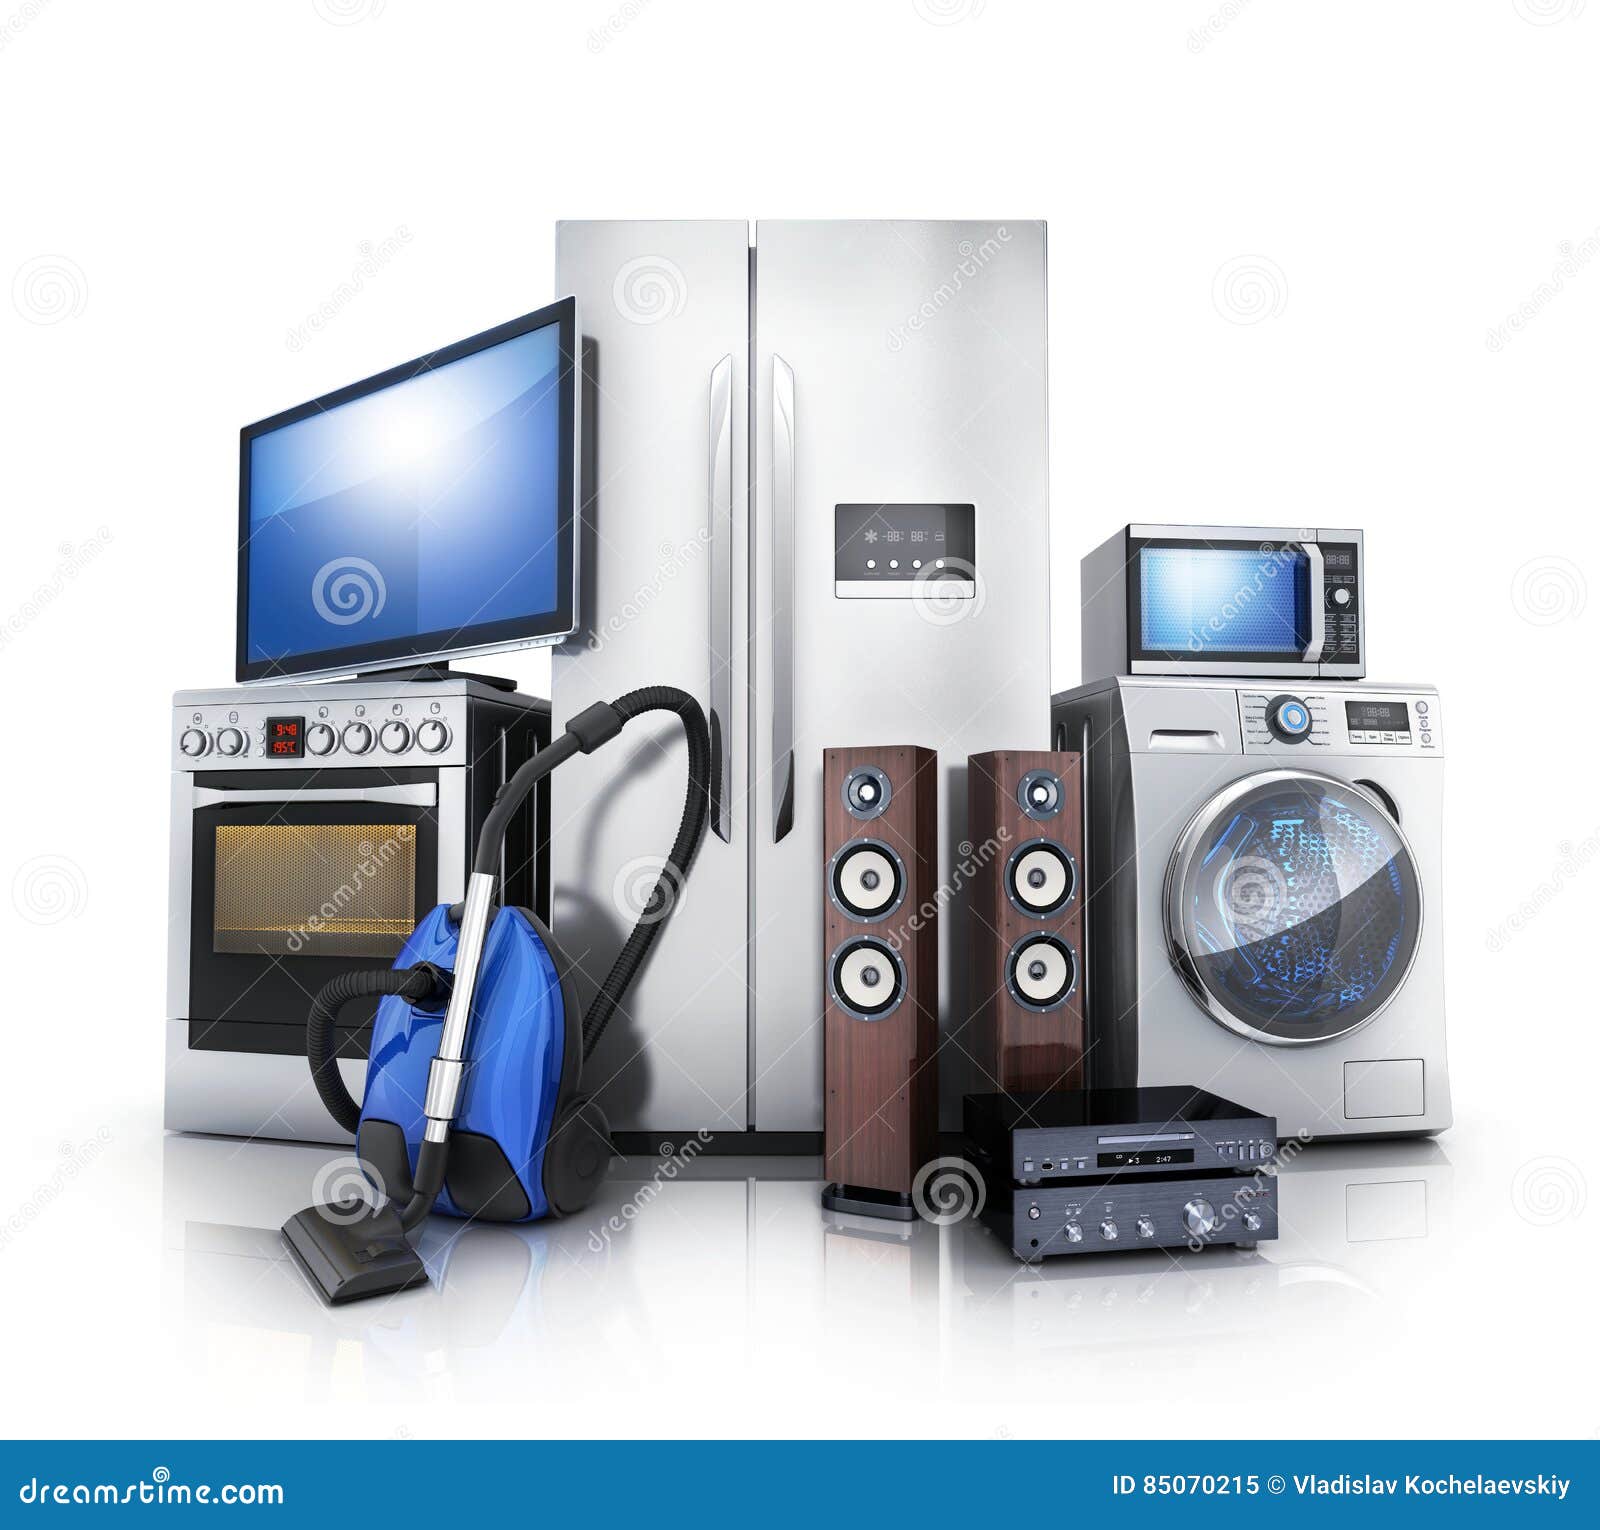 consumer and home electronics